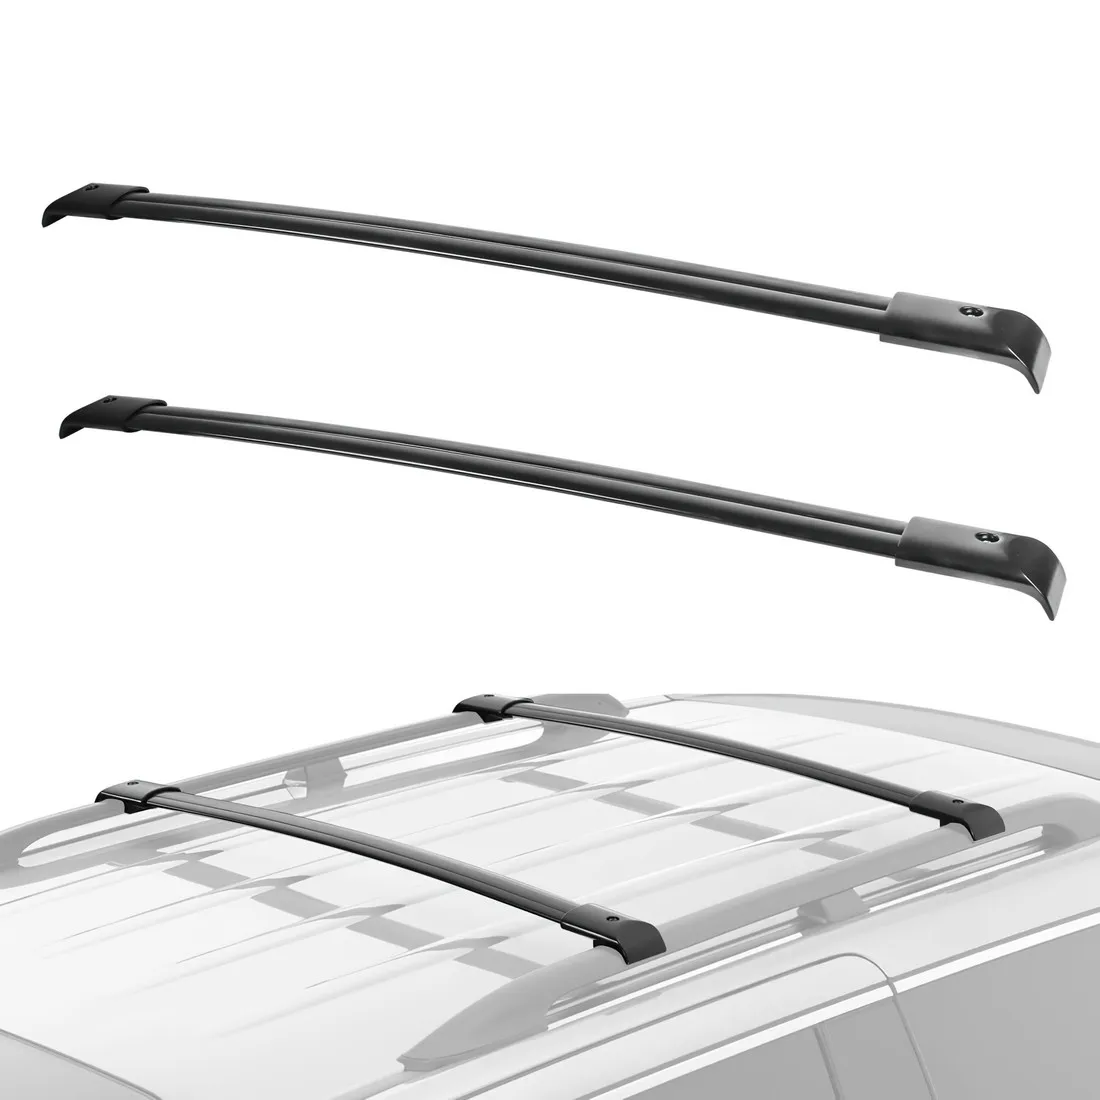 Roof Rack Cross Bar Rail Compatible for Honda Odyssey with Side Rails 2005 2006 2007 2008 2009 2010 Cargo Racks Rooftop Luggage